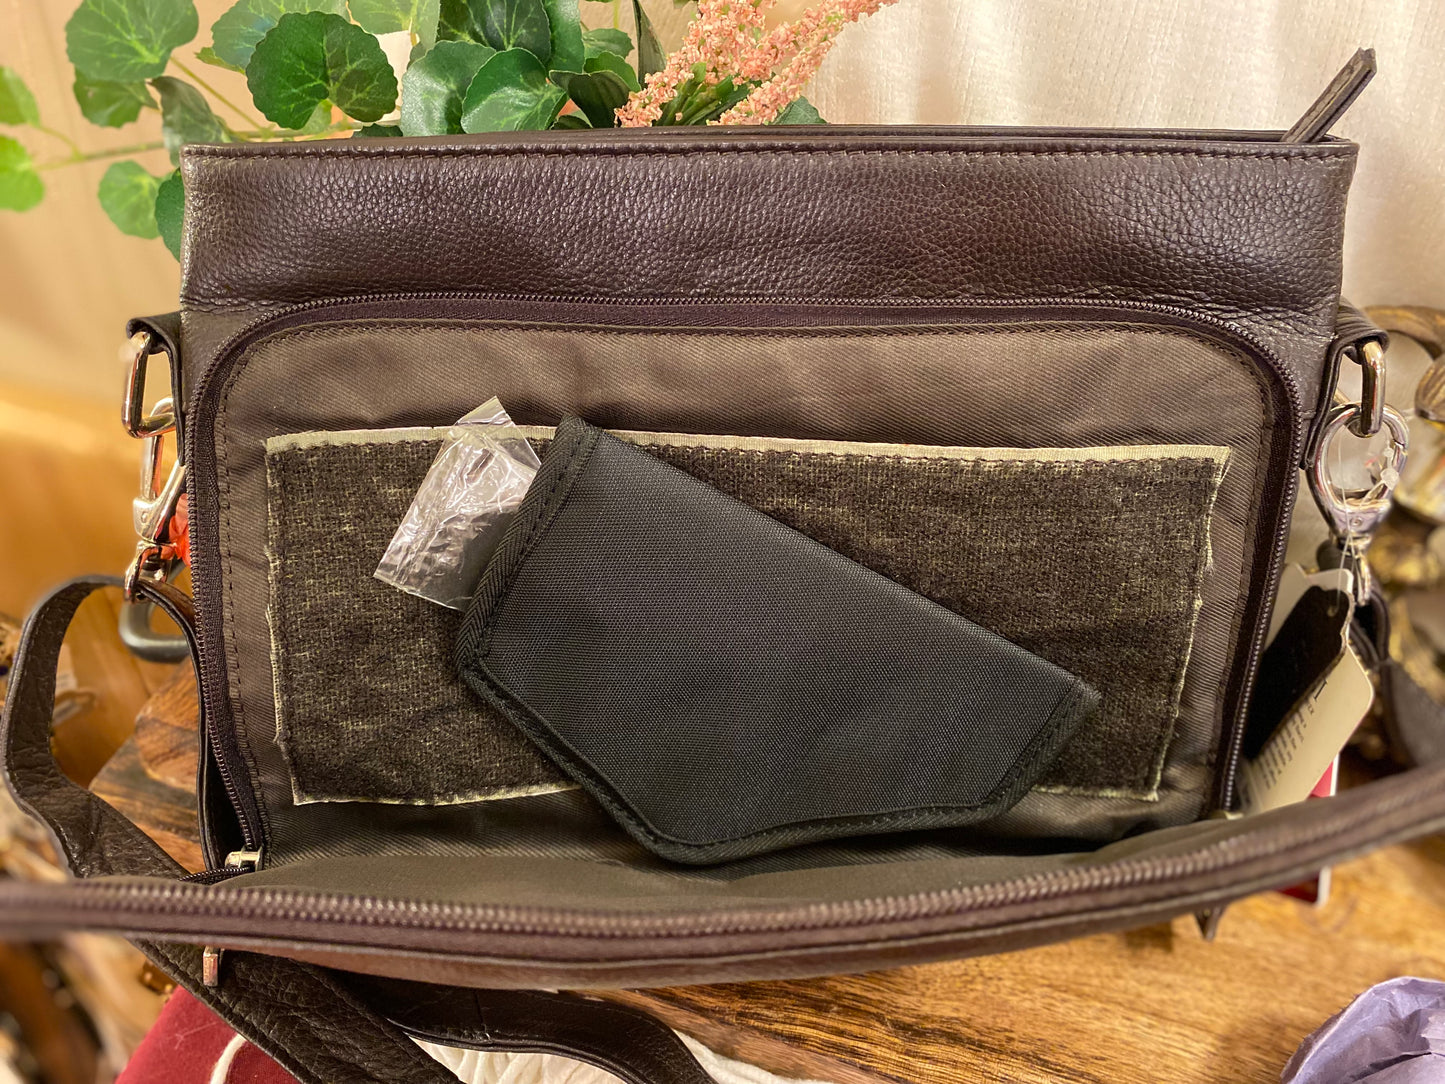 🛍️ Deal of the Day: Genuine Leather Conceal Carry Purse